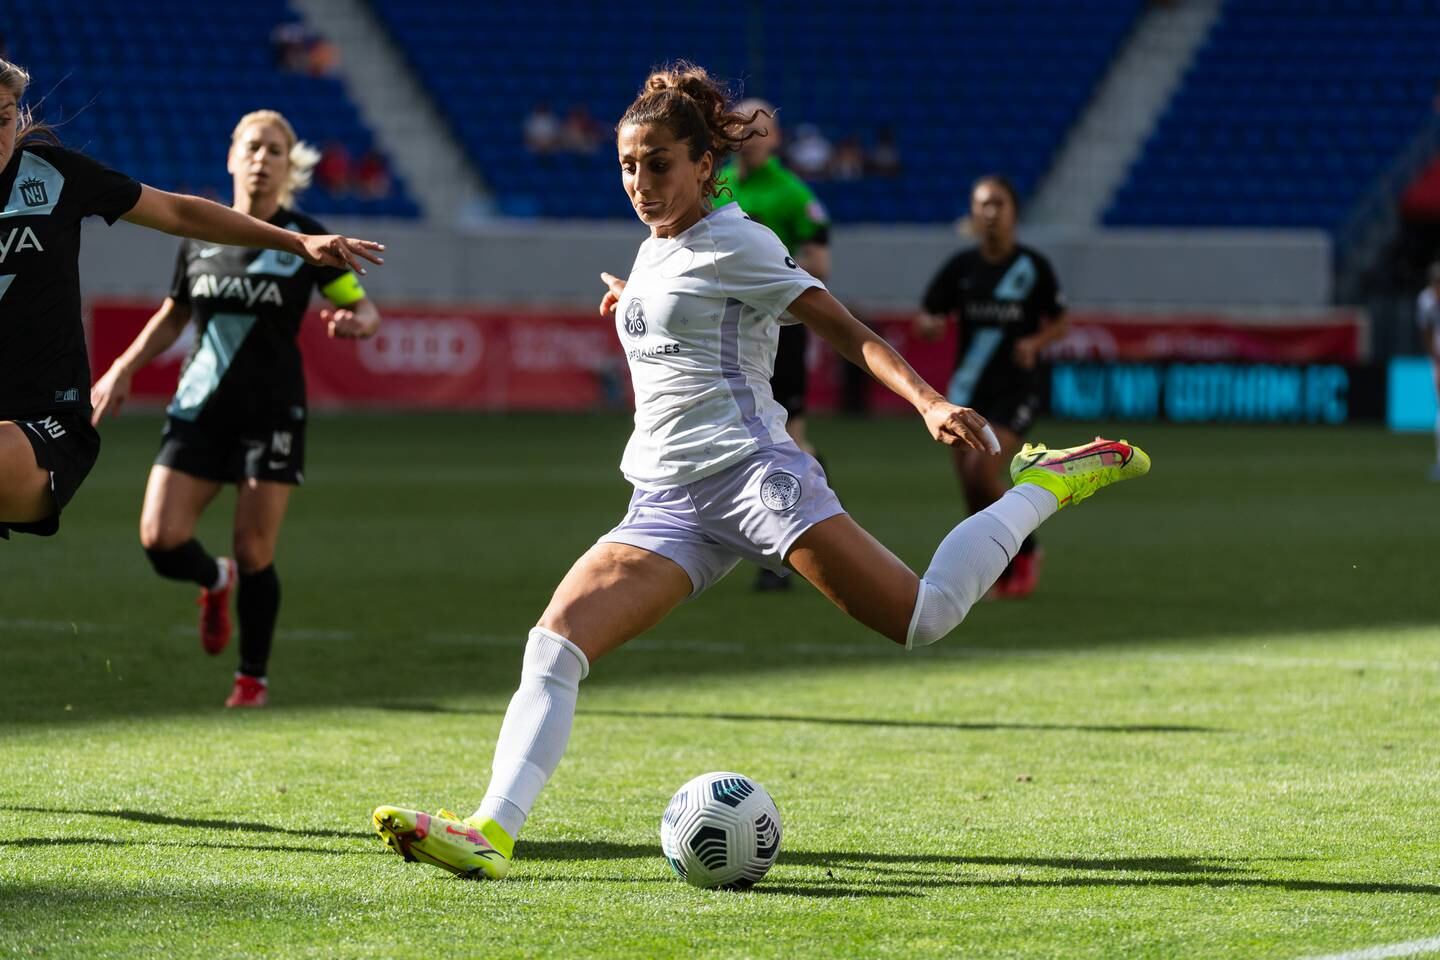 After winning the French League title with Paris Saint-Germain in 2020, Nadia Nadim signed for Racing Louisville FC in the US. Getty